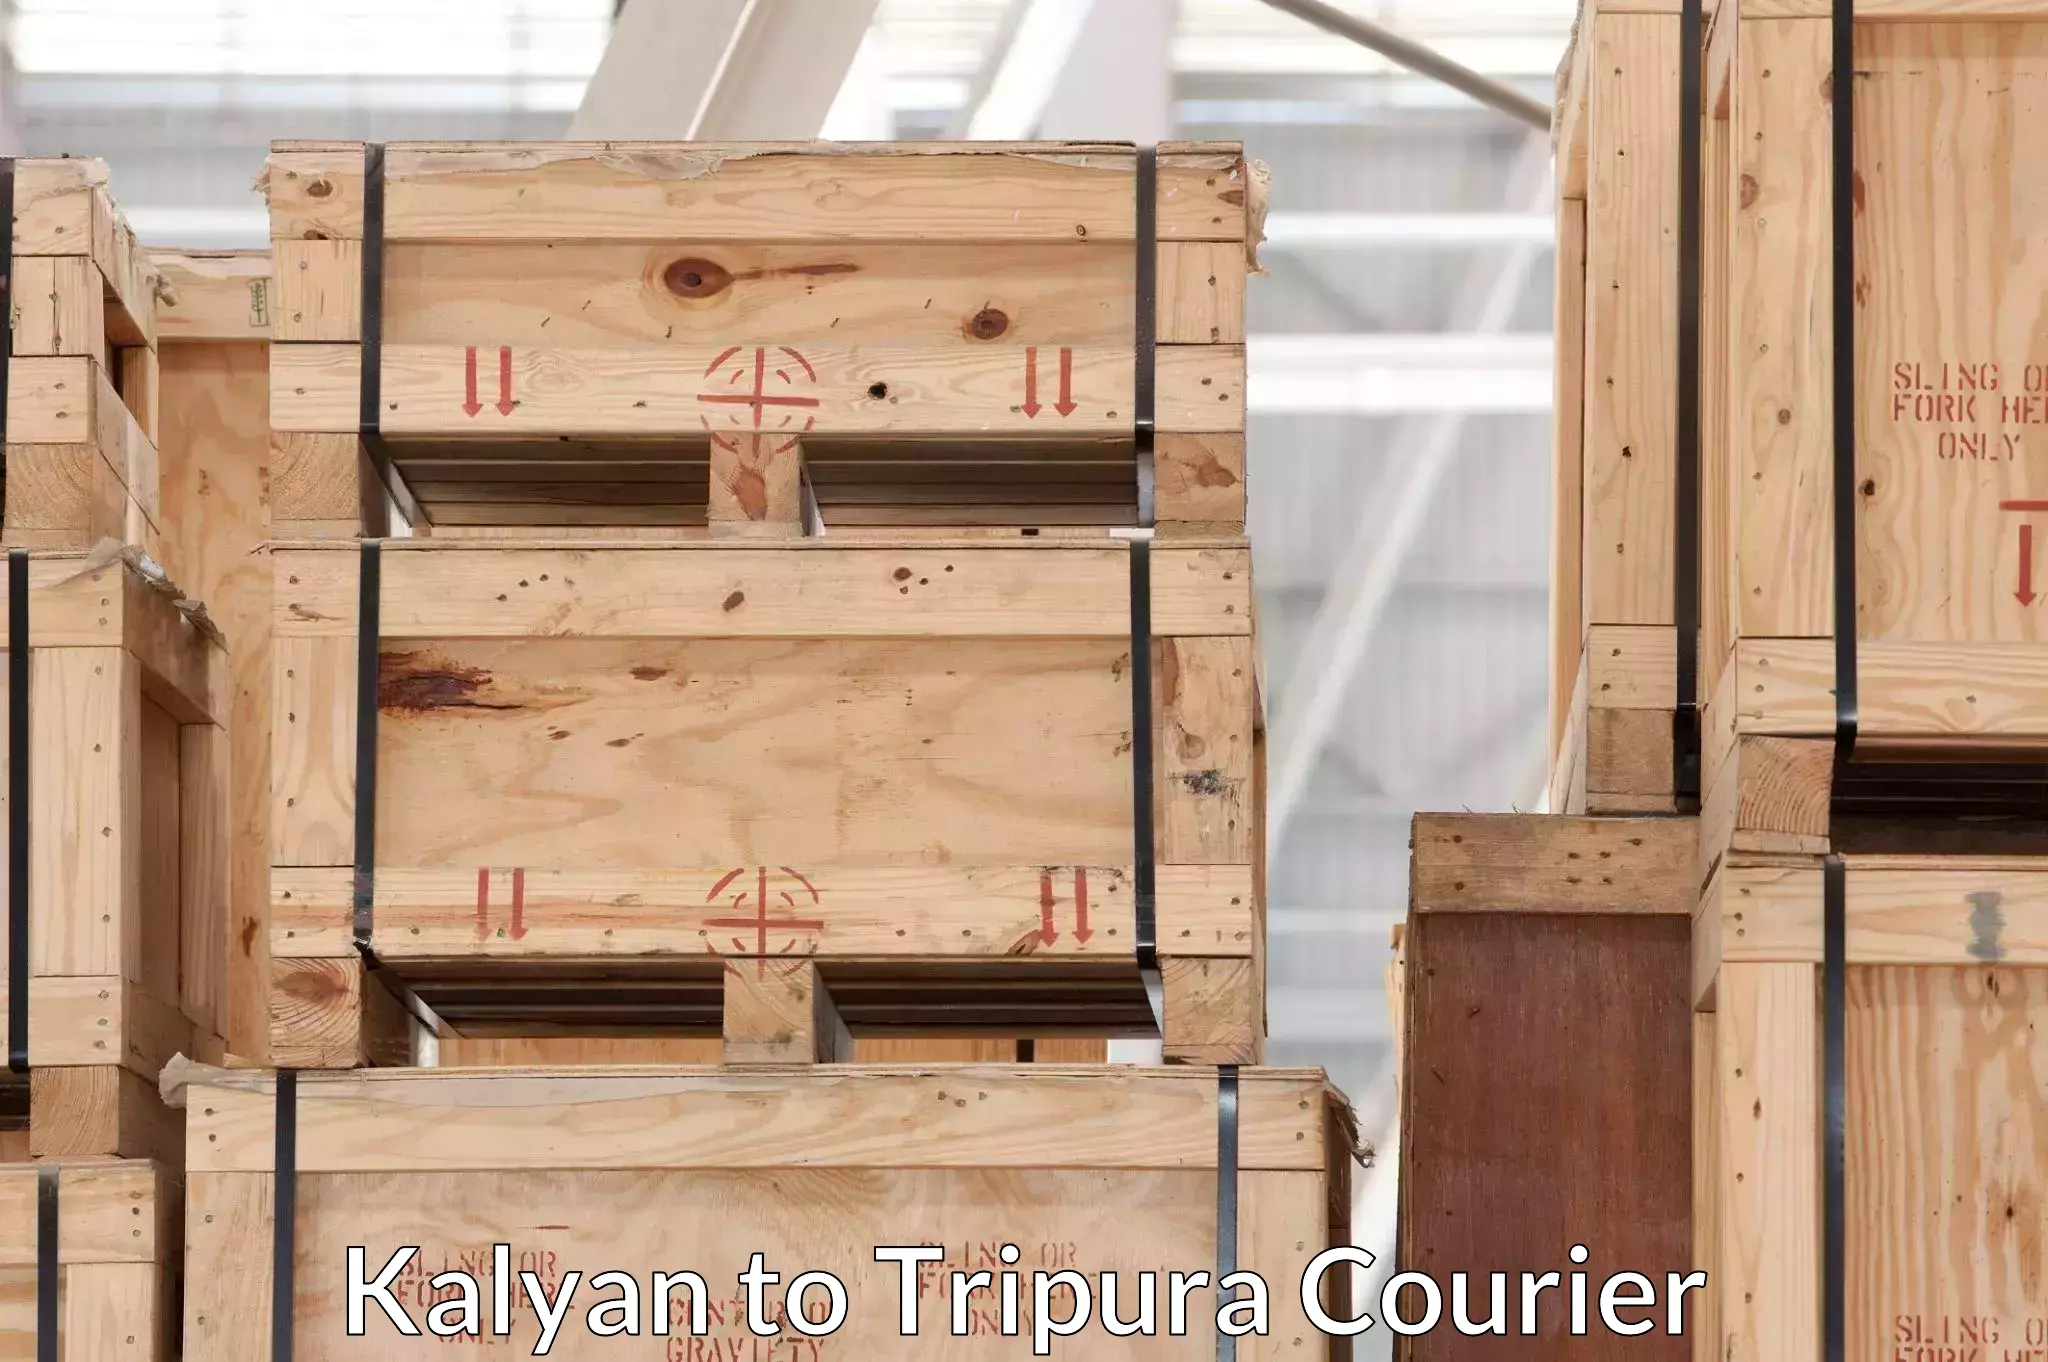 Trusted relocation experts Kalyan to Tripura